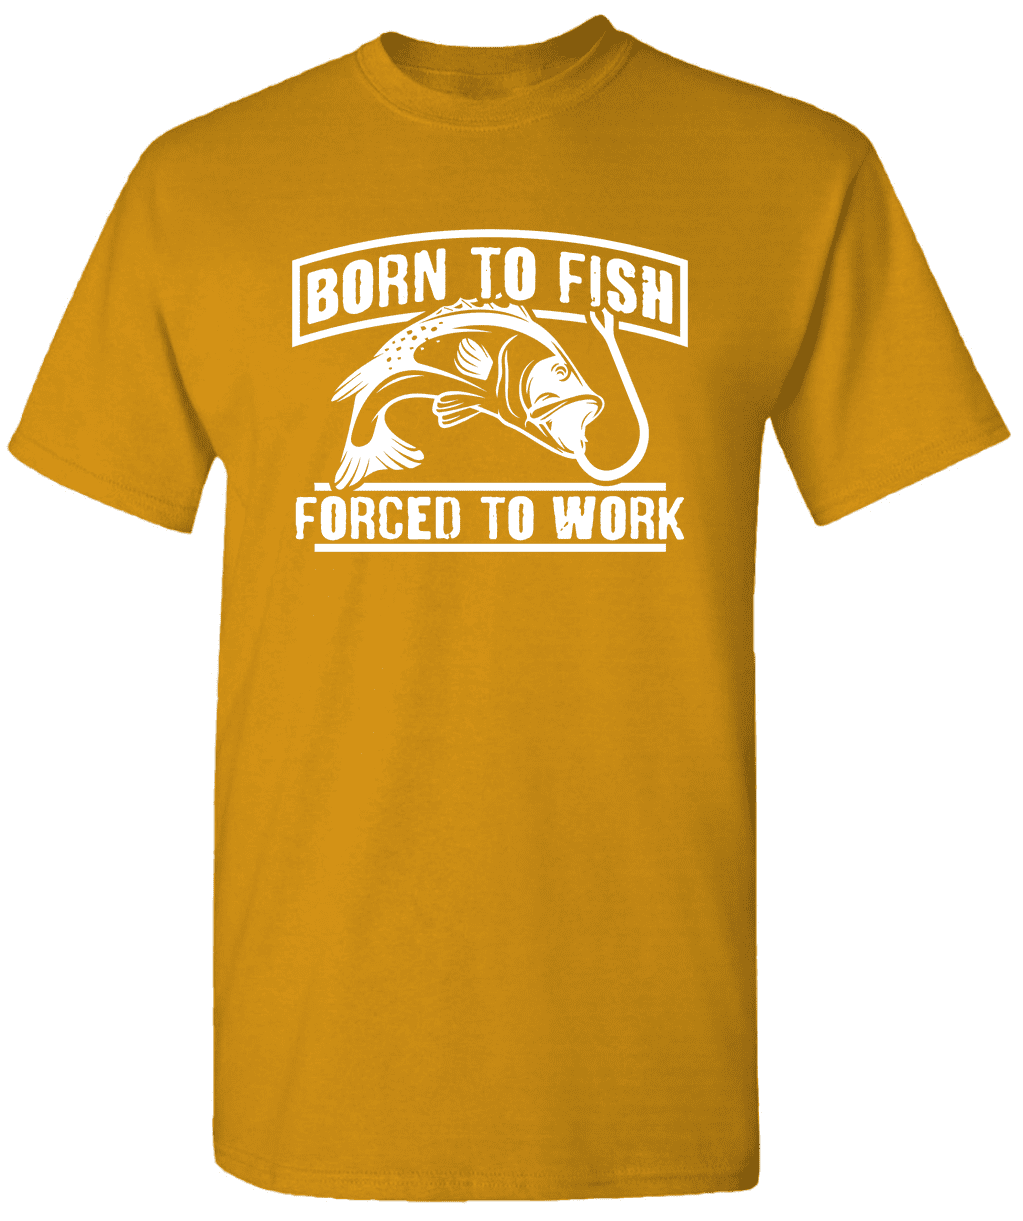 Born To Fish Forced To Work - Graphic Fishing T-Shirt Novelty Fishing Shirt